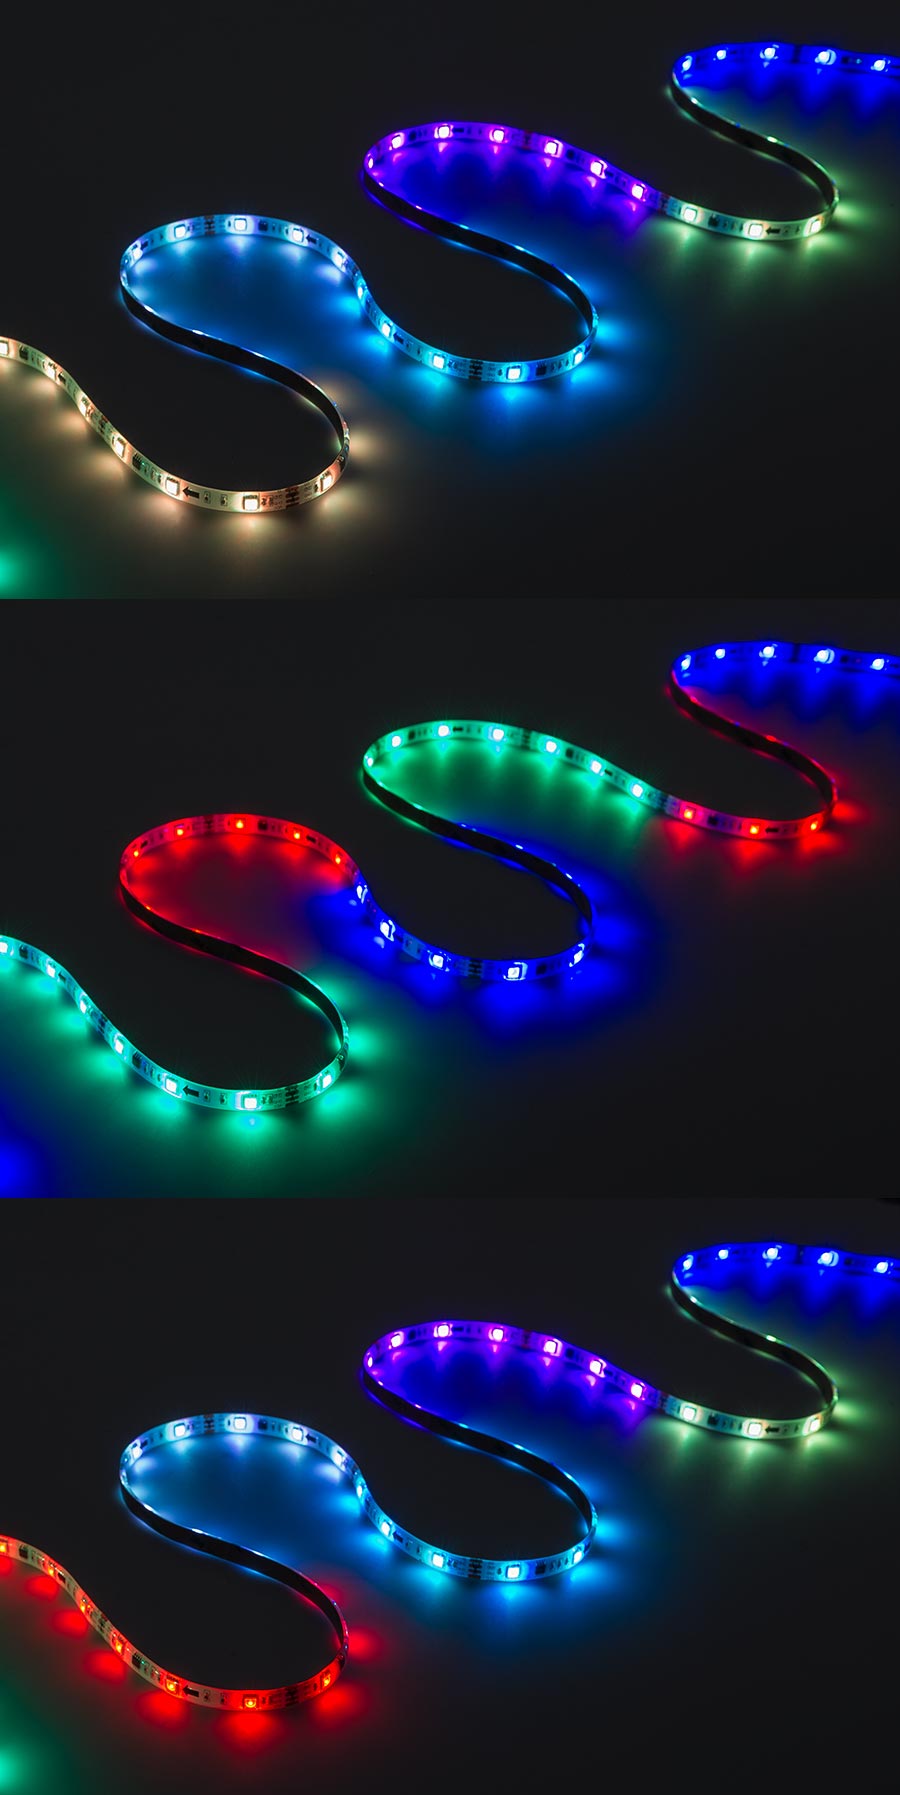 SWDCK-RGB150 color changing rgb led strips